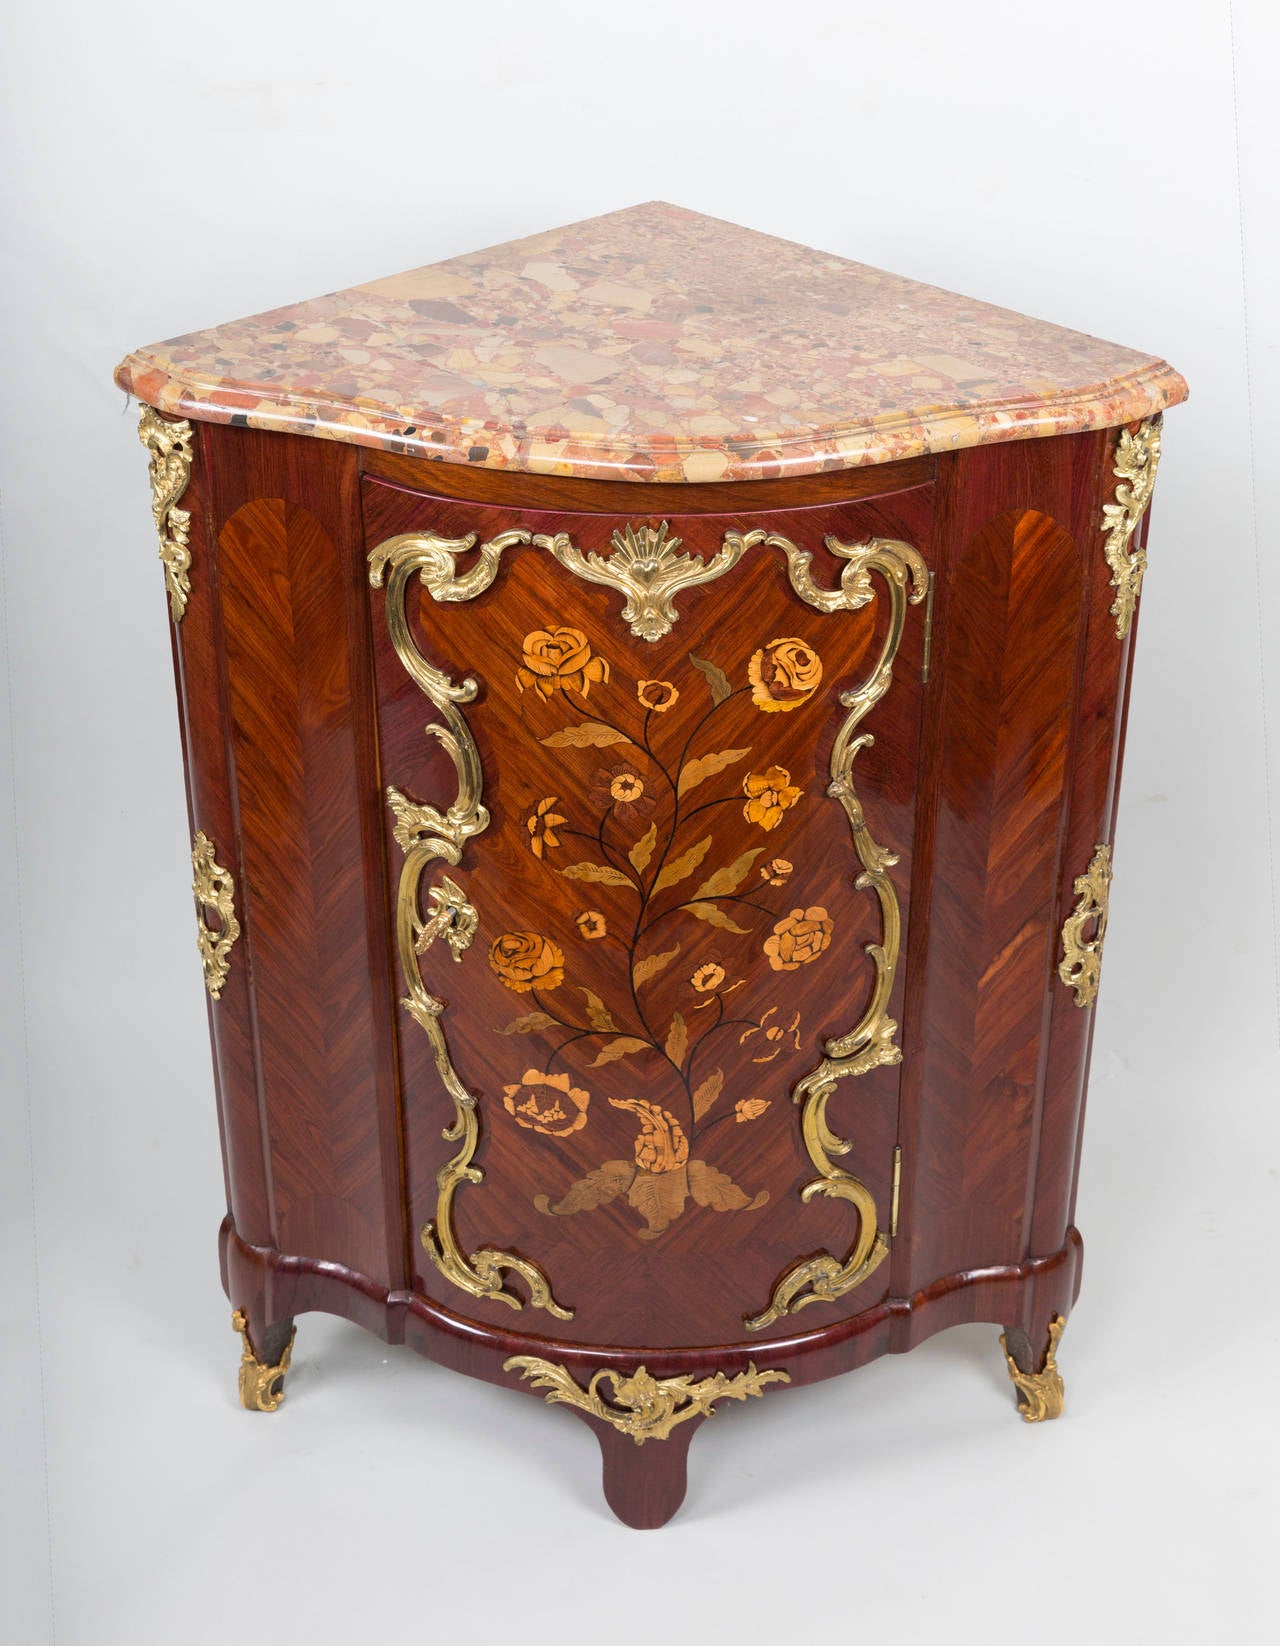 Floral marquetry in amaranth and satinwood with an exceptional bronze decorum.

Attributed to Jean-Pierre Latz (1691-1754).